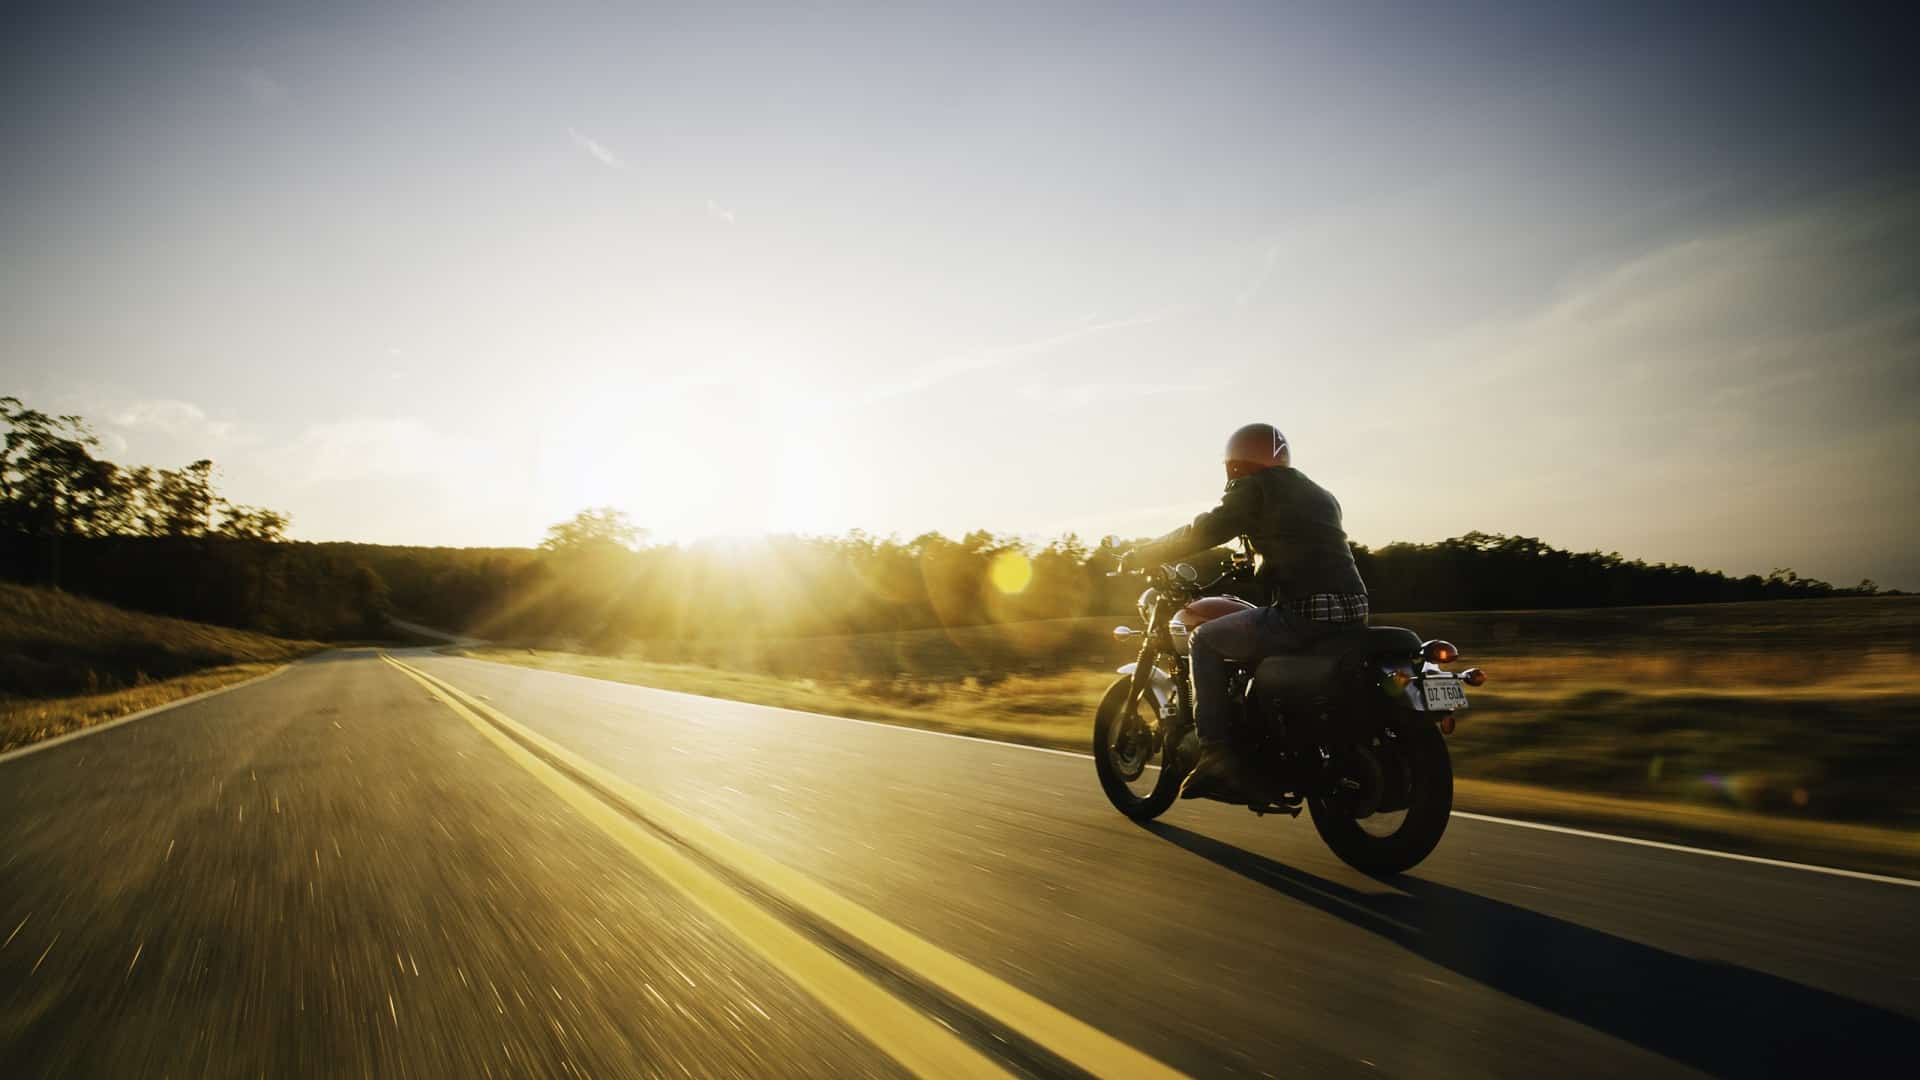 What To Do When Being Passed By A Motorcycle?